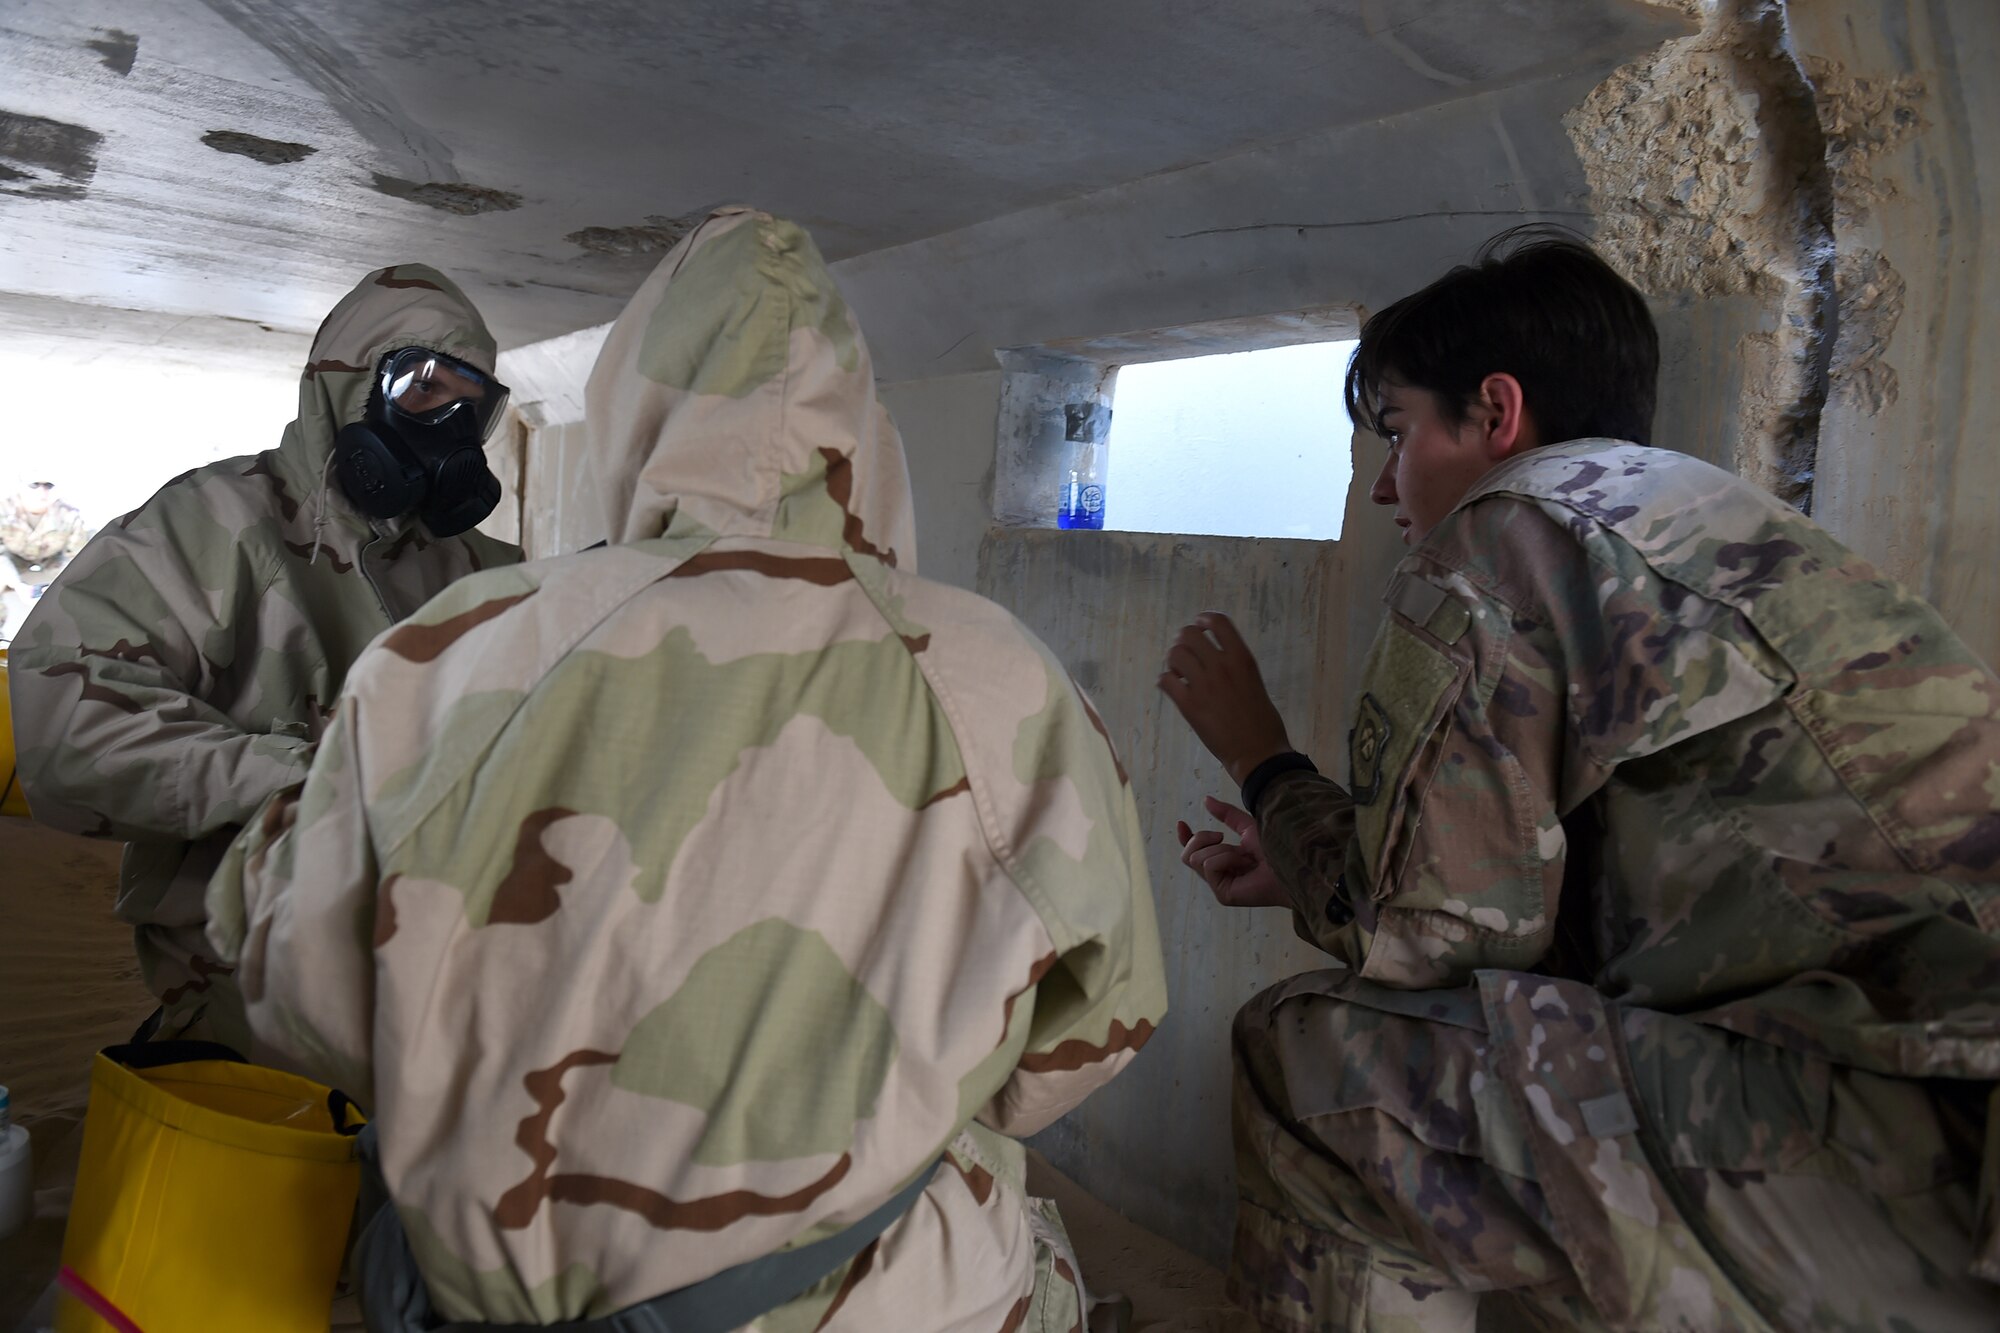 An Airman in chemical protection gear collects a sample of a liquid